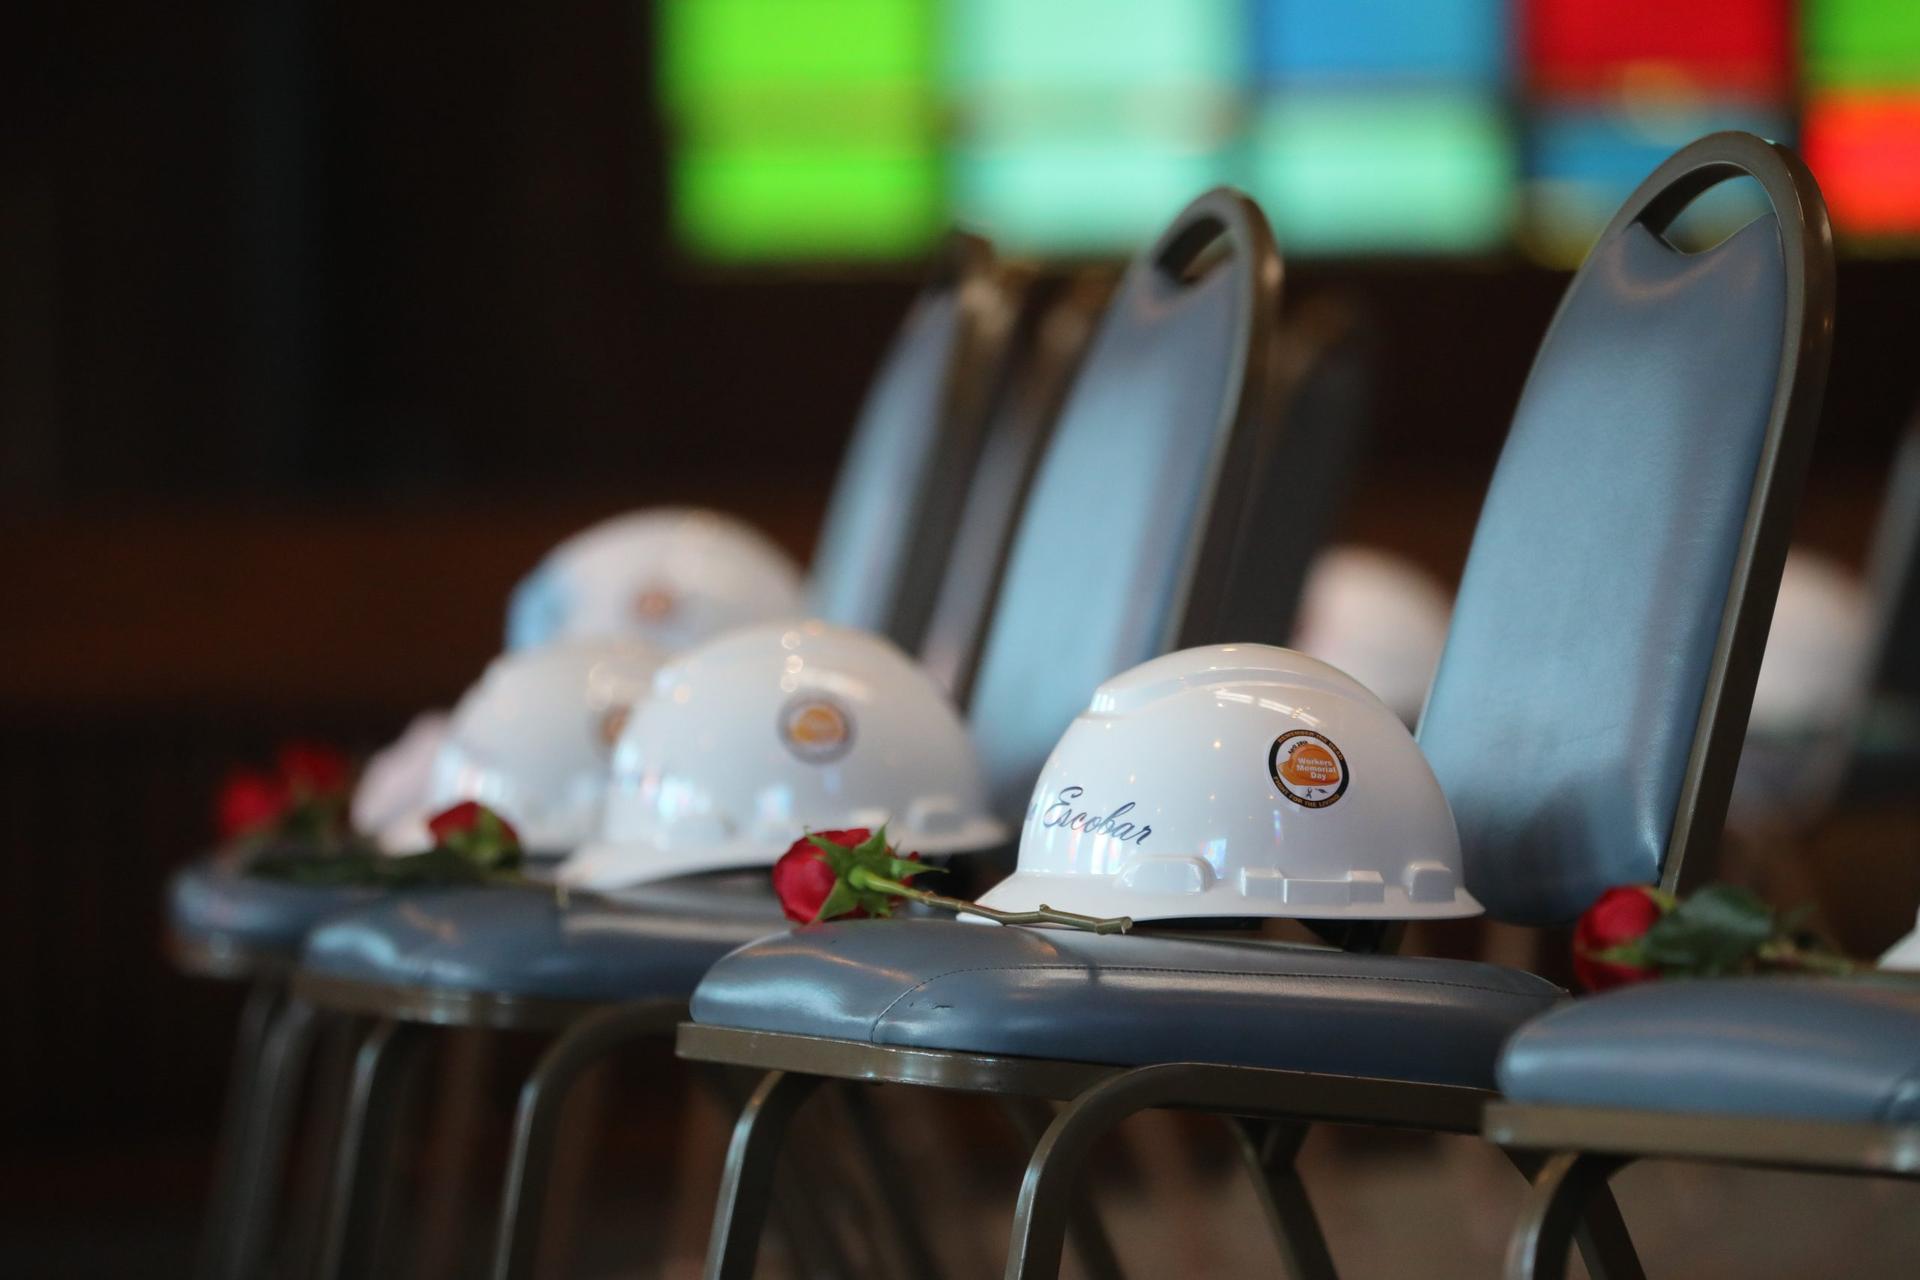 Construction workers killed on job in past year remembered in special Mass